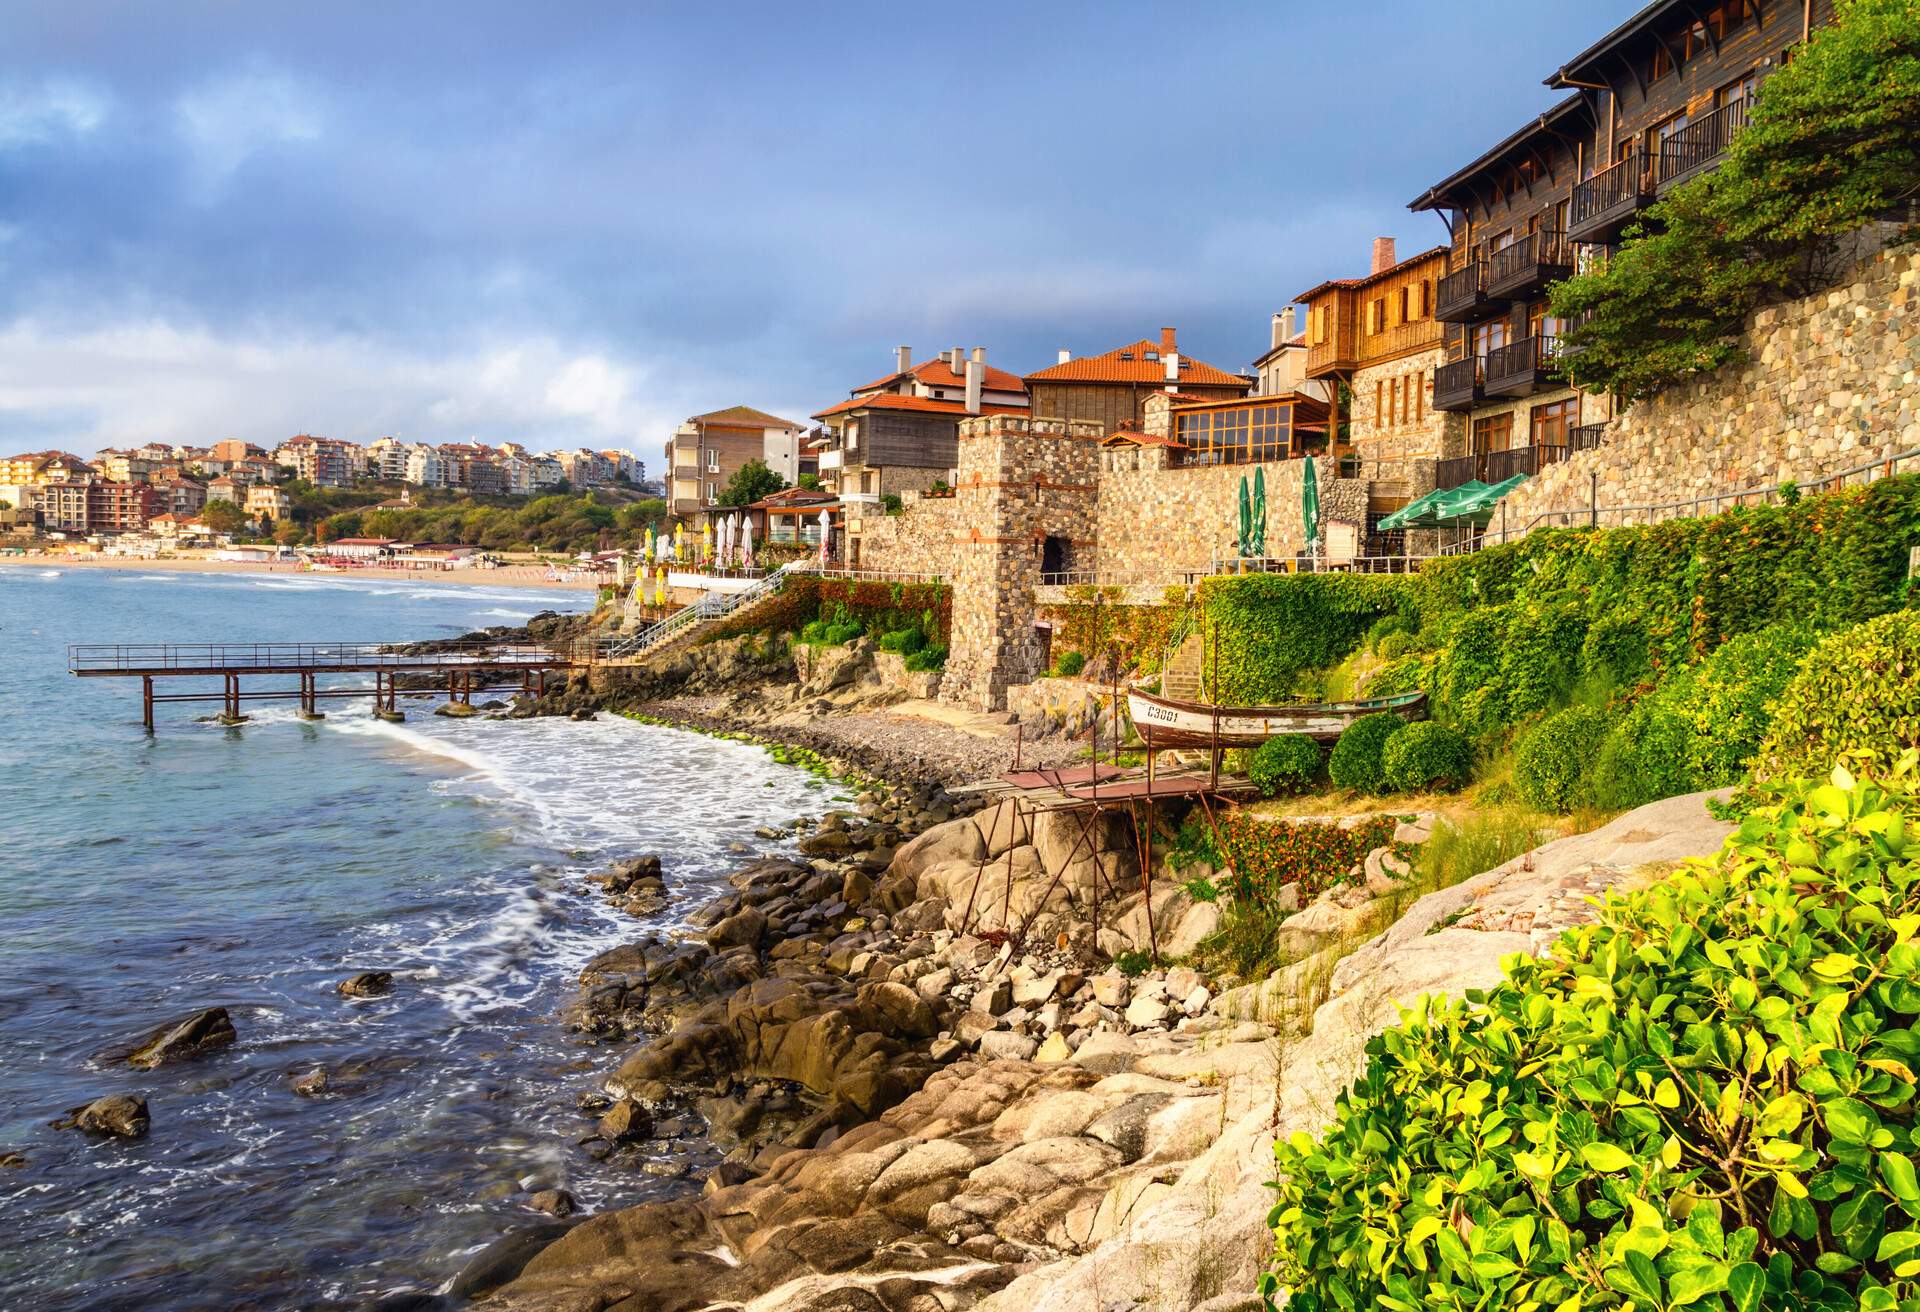 Seaside landscape - embankment with fortress wall in the city of Sozopol on the Black Sea coast in Bulgaria